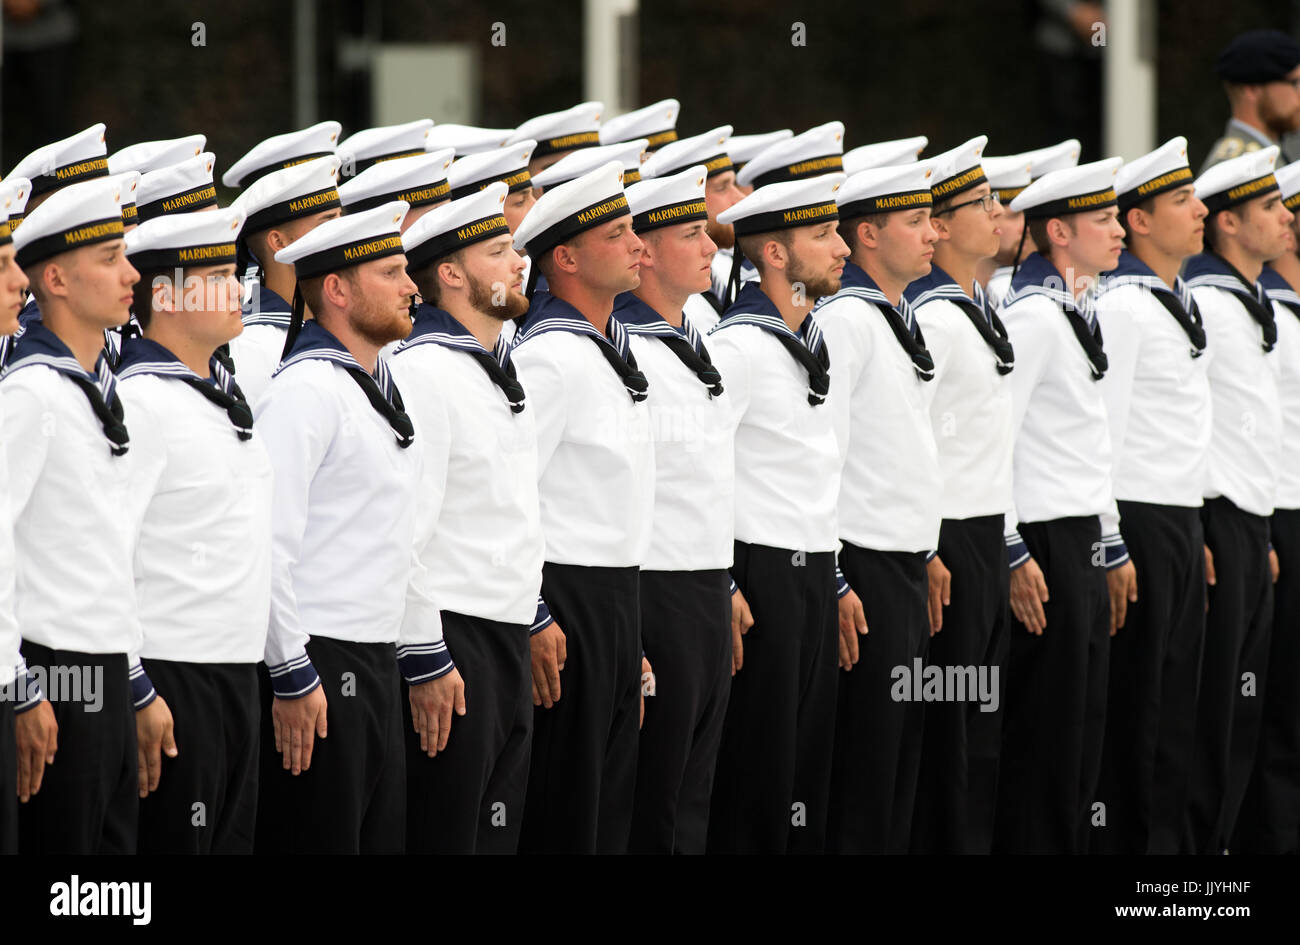 Berlin, Germany. 20th July, 2017. Recruits of the German Naval NCO School in Ploen seen prior to the swearing-in ceremony on the Bendlerblock parade ground in Berlin, Germany, 20 July 2017. 400 recruits were sworn in during a ceremony on the 73rd anniversary of the 20 July plot, an attempt launched by a group of conspirators to assassinate Adolf Hitler, leader of Nazi Germany at that time. Photo: Soeren Stache/dpa/Alamy Live News Stock Photo